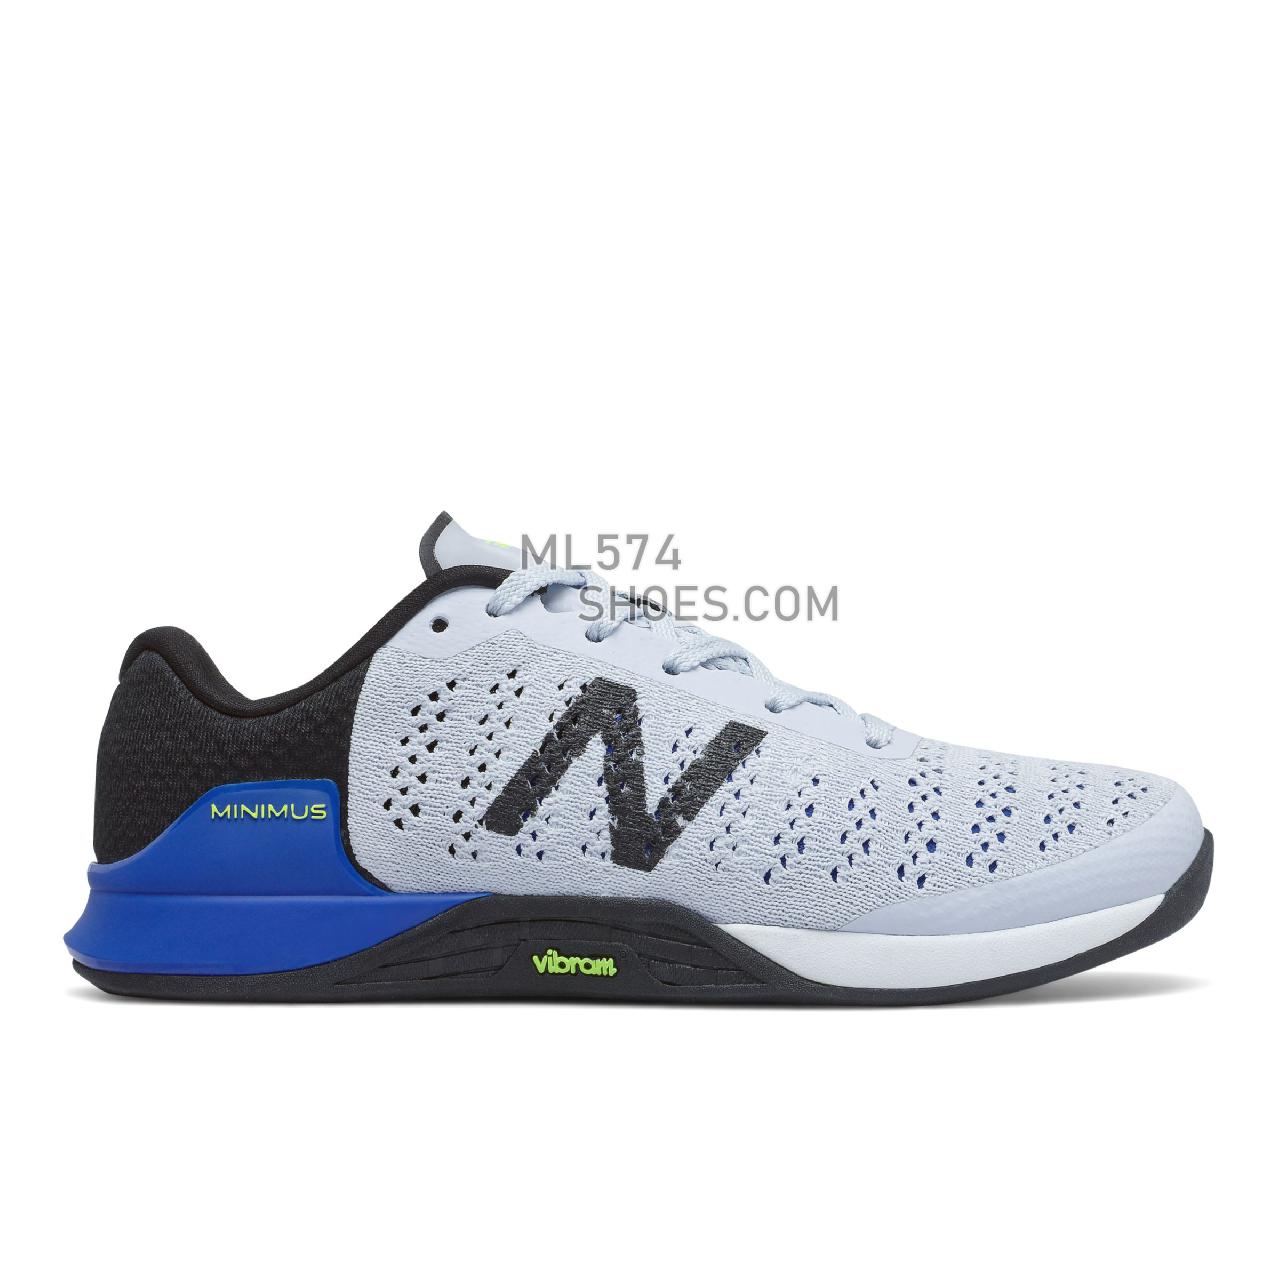 New Balance Minimus Prevail - Women's Training - Moon Dust with Cobalt and Lime Glo - WXMPRG1